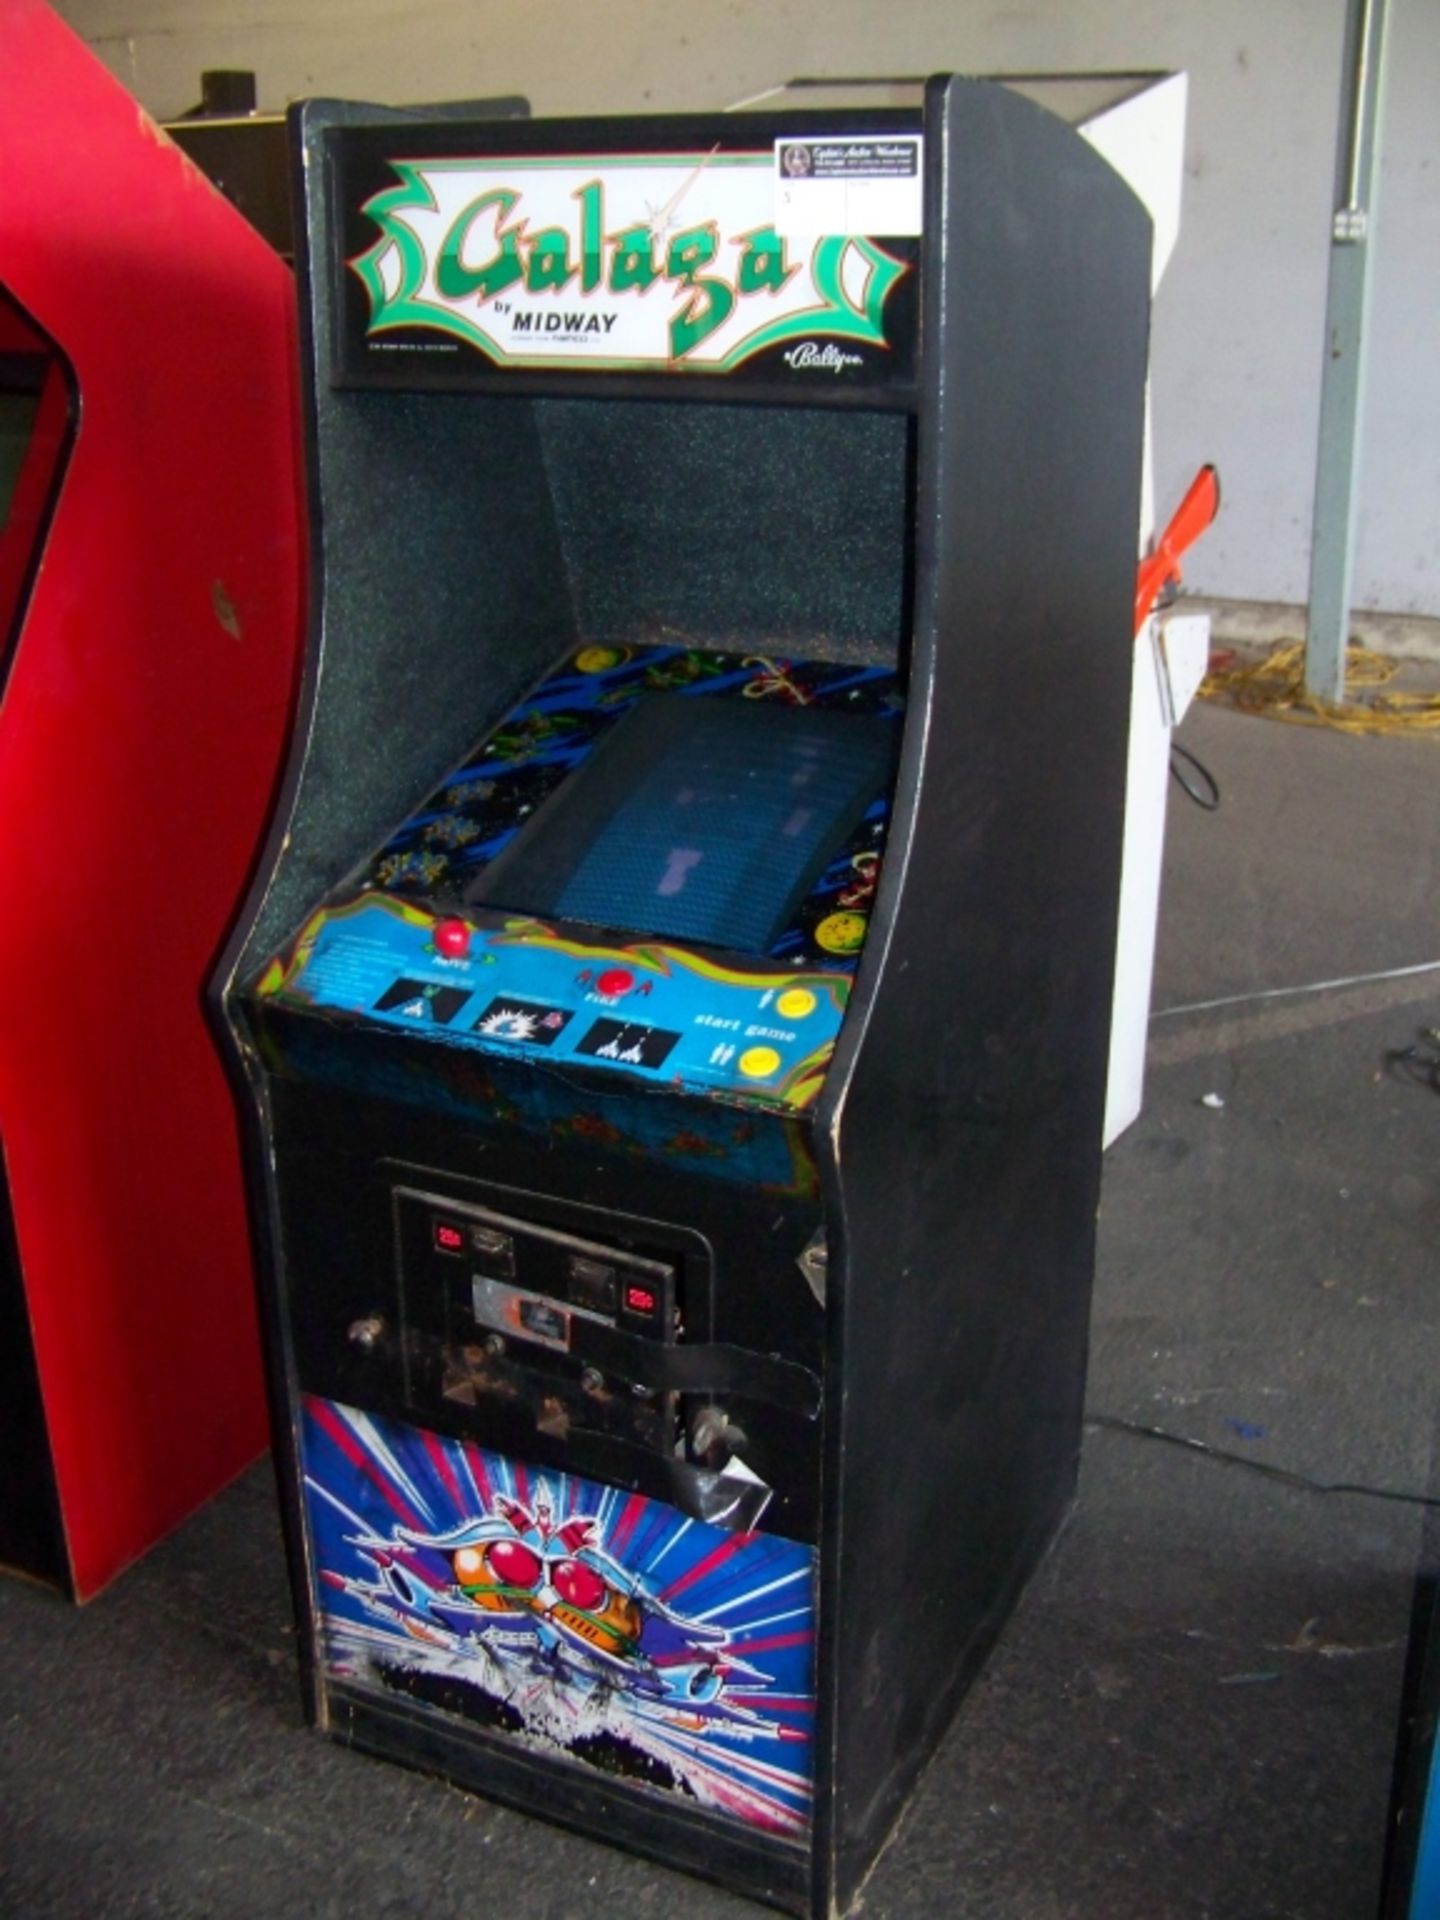 GALAGA UPRIGHT 19" CLASSIC ARCADE GAME MIDWAY - Image 2 of 3